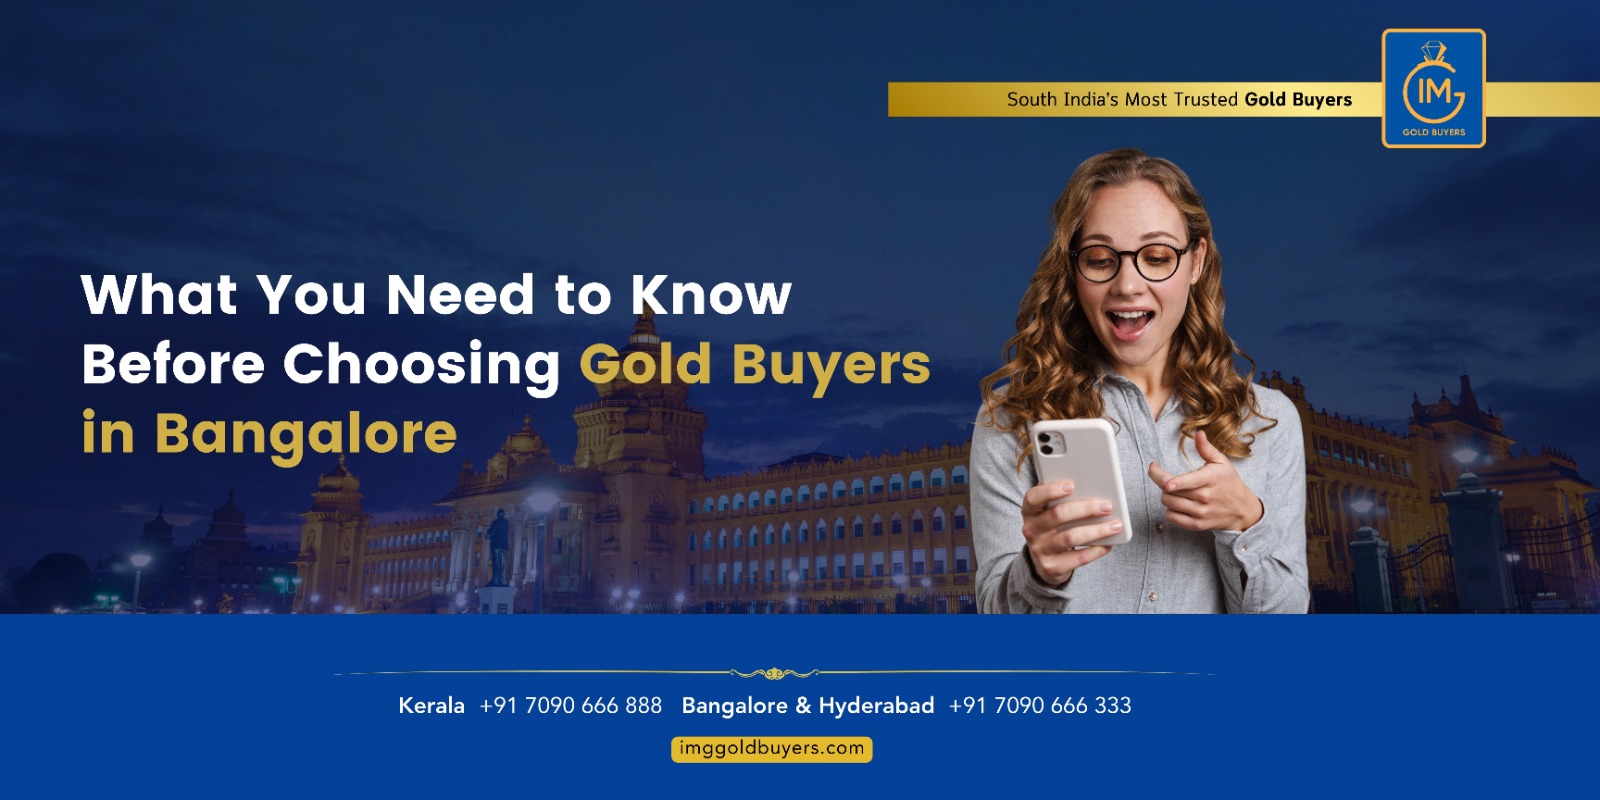 gold buyers in bangalore; top gold buying company in bangalore; best gold buyer in bangalore; best gold buying company in bangalore; best gold buyers in bangalore; pleadged gold buyers in bangalore; gold buying company in bangalore; sell gold for cash in bangalore;